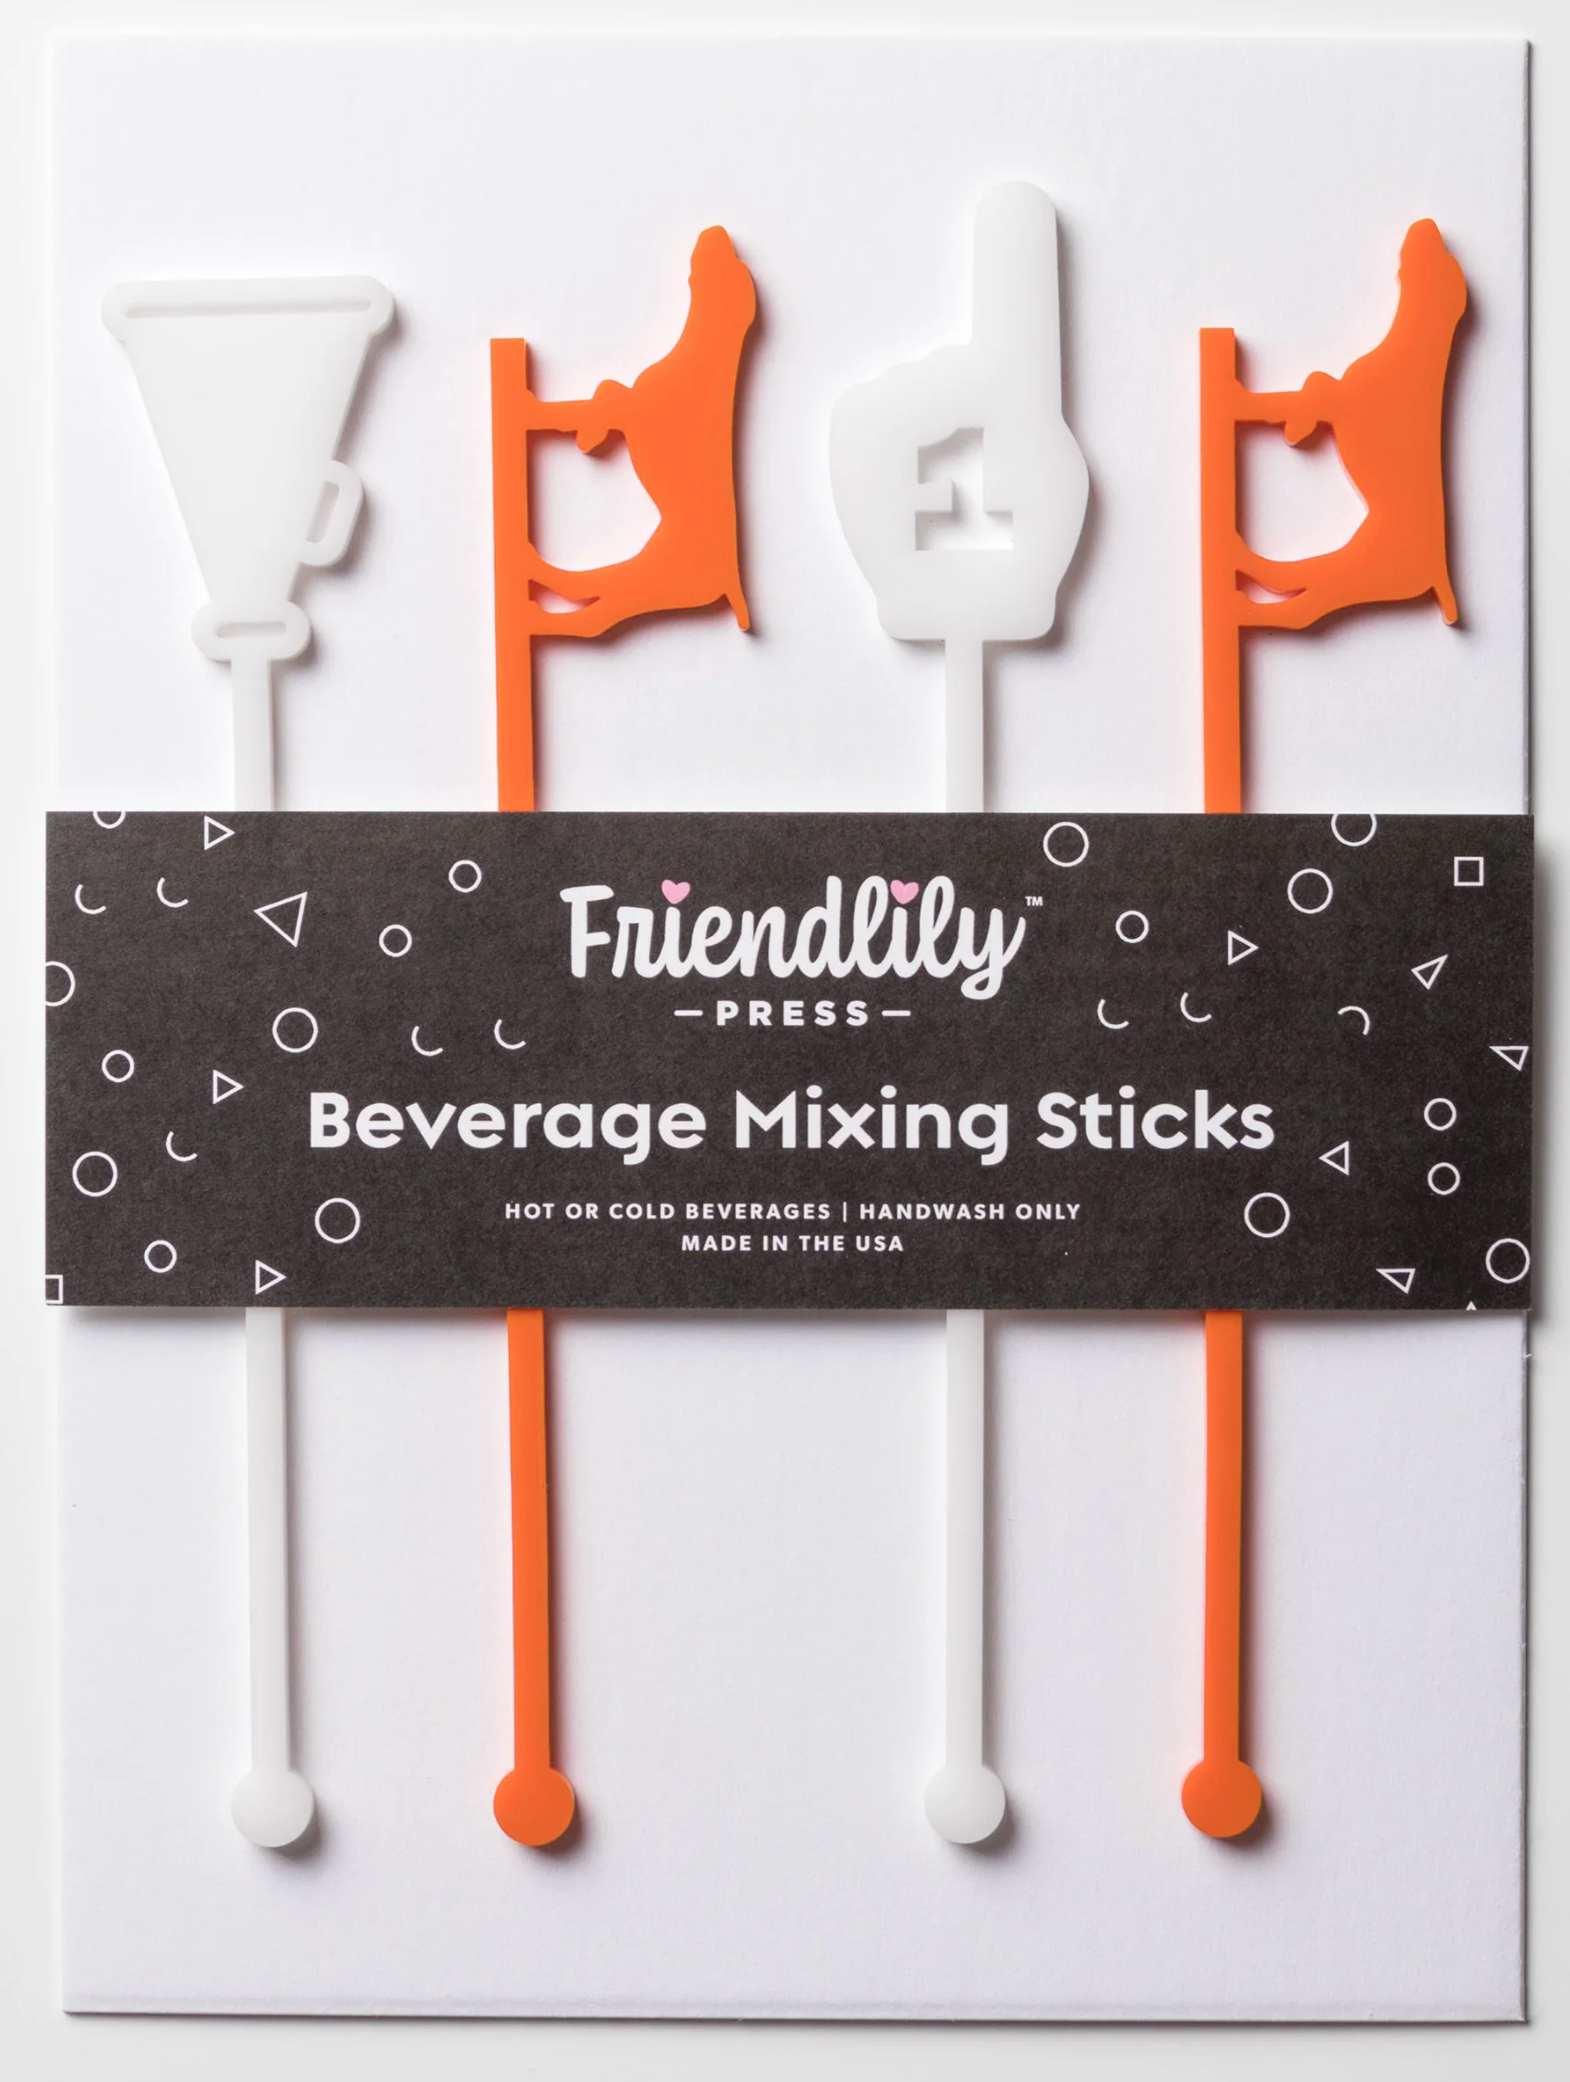 Tennessee Beverage Mixing Sticks